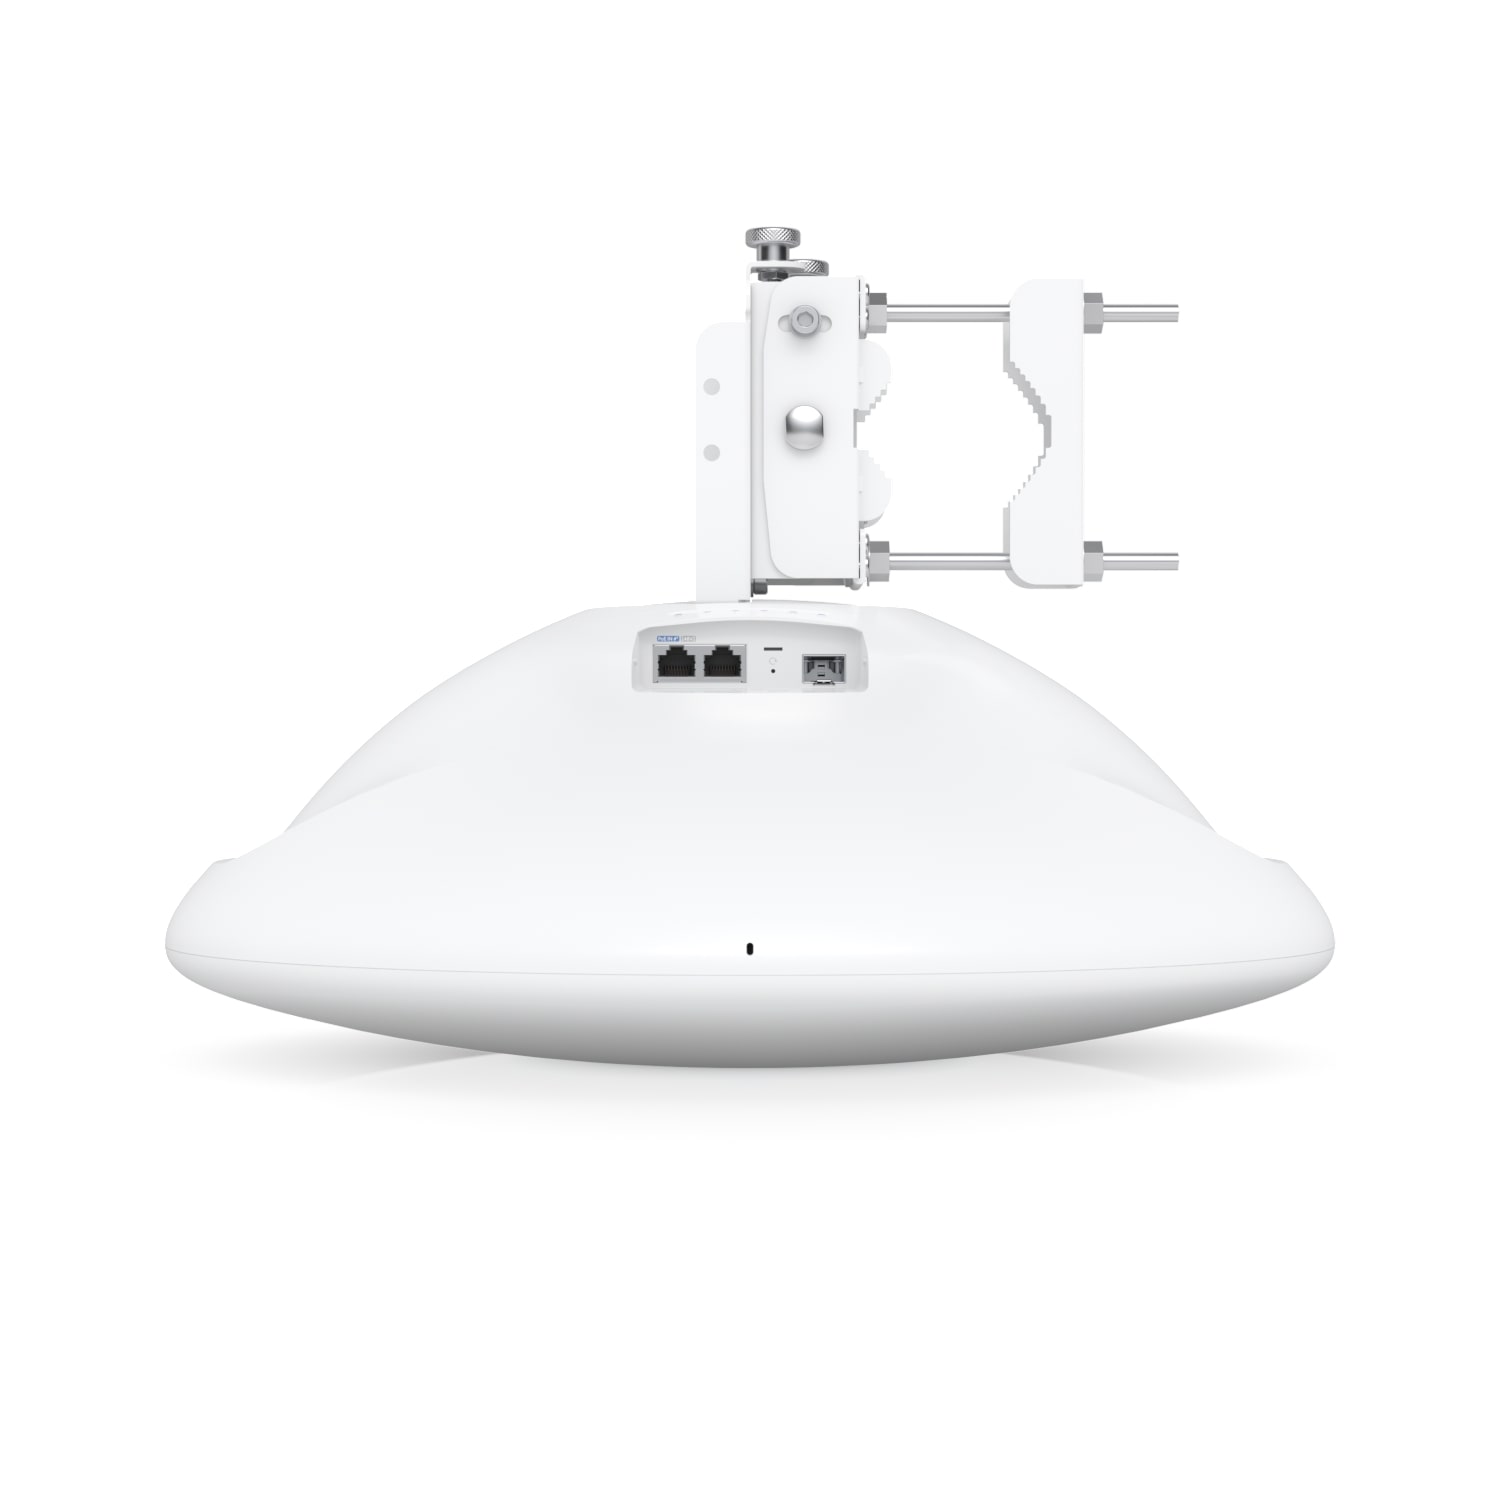 Ubiquiti Wave Professional, High-capacity 60 GHz radio that Supports Long-distance PtP (bridge)  PtMP links, 2.5 GbE, 10G SFP+ ports, Incl 2Yr Warr